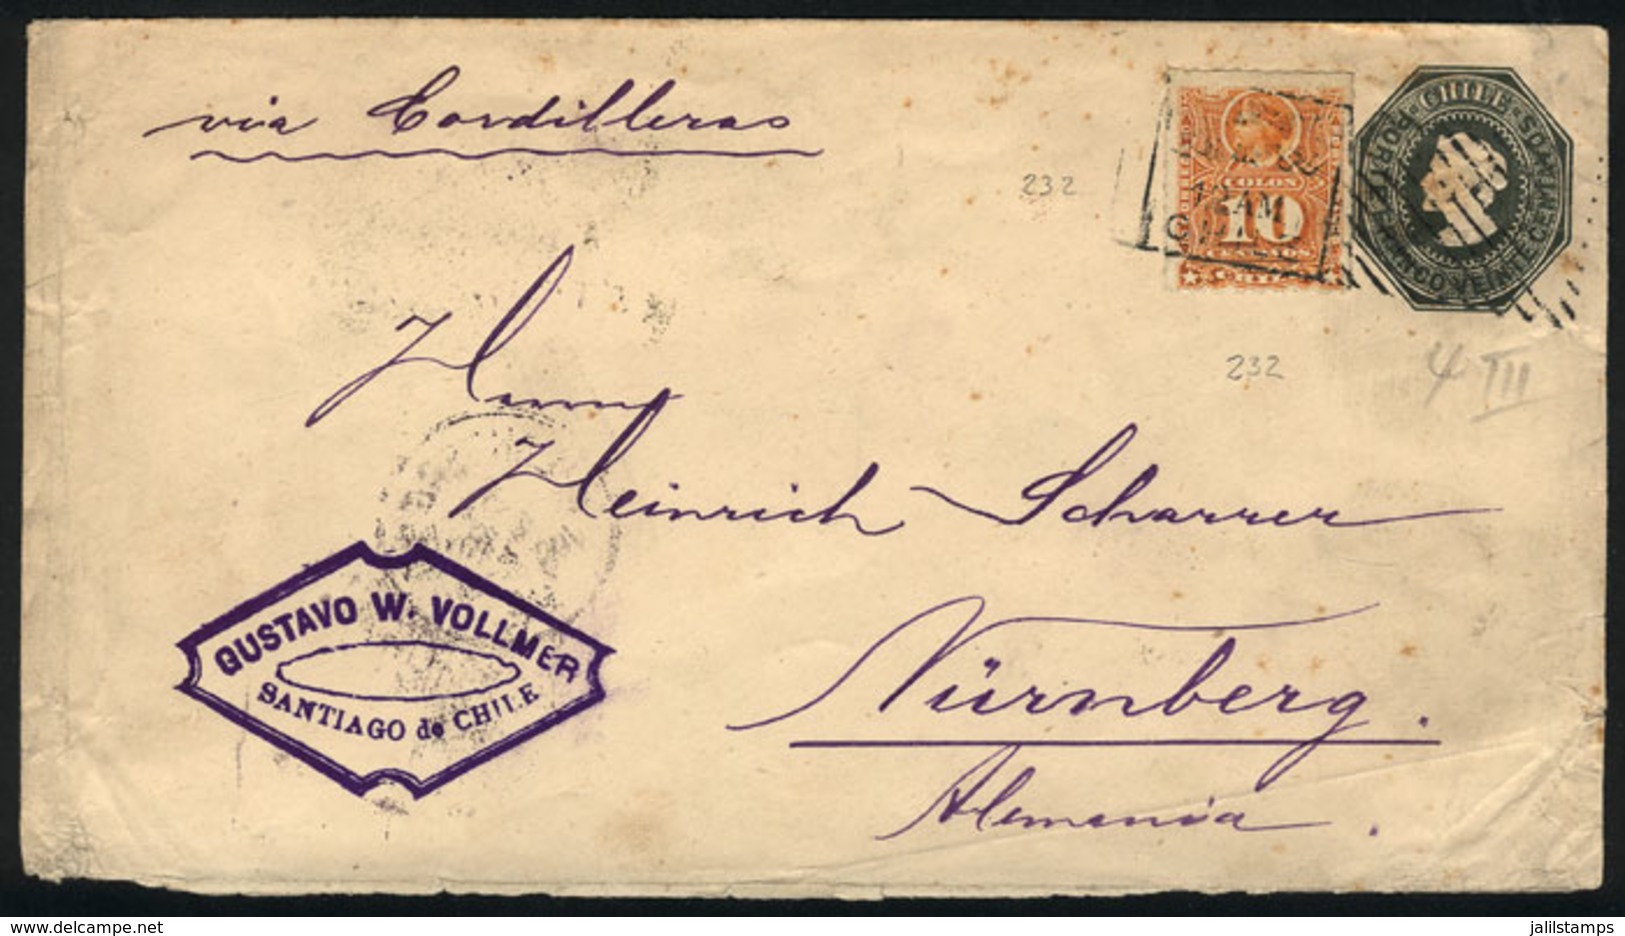 1059 CHILE: Stationery Envelope Of 20c. (green) + Colombus 10c. Rouletted (Sc.29), Sent From Santiago To Germany In FE/1 - Chile